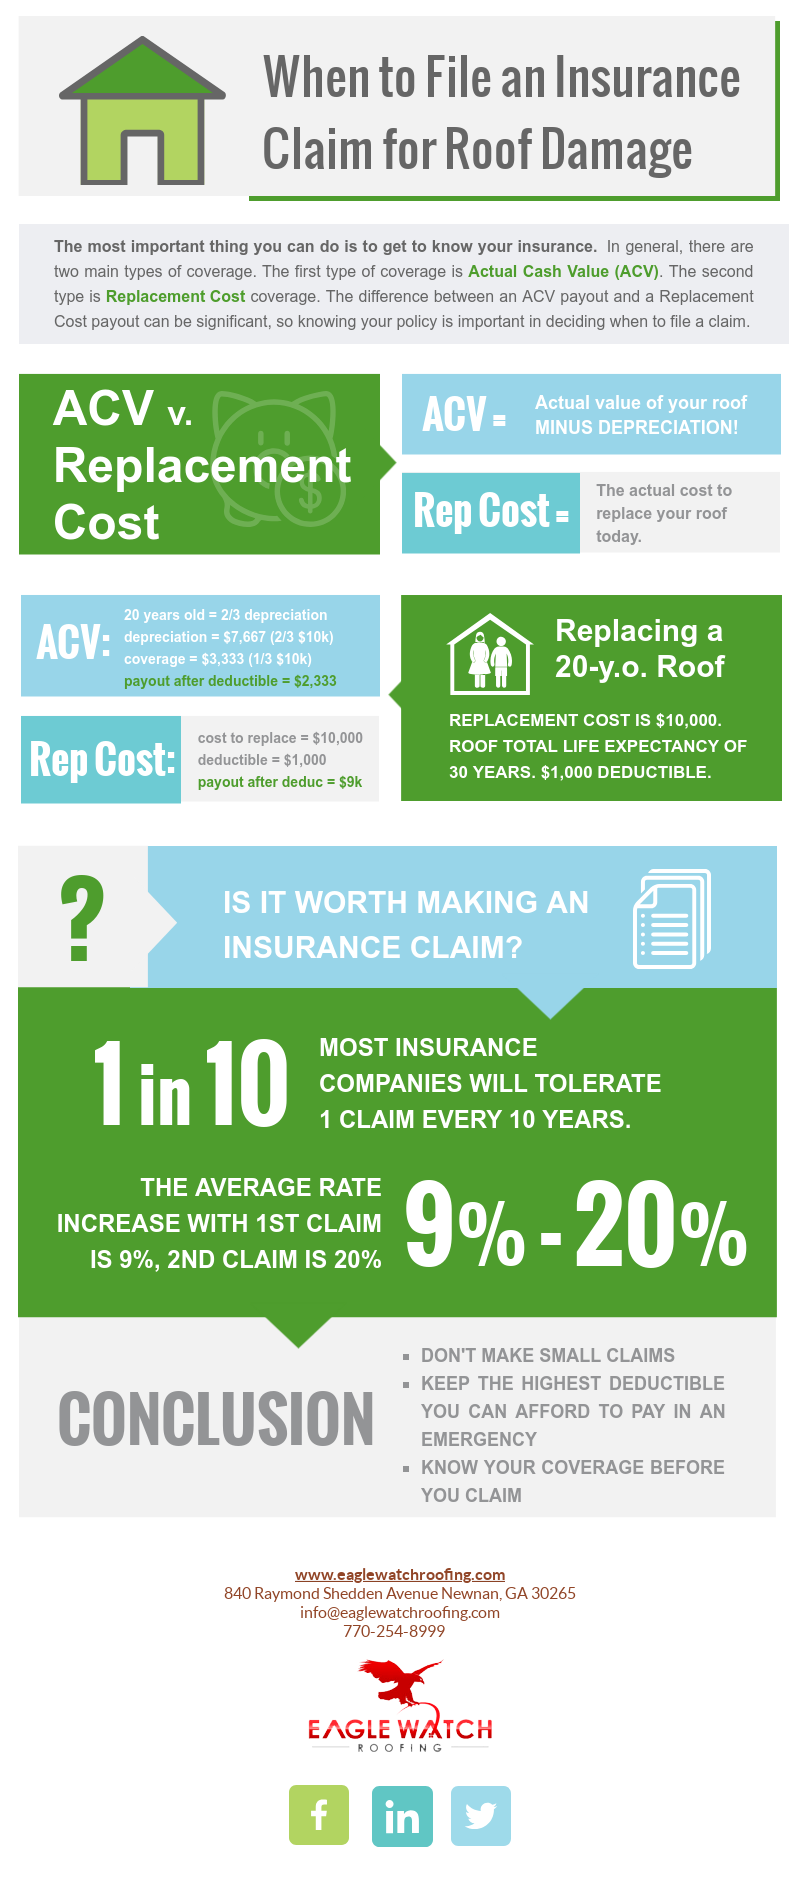 When to File an Insurance Claim for Roof Damage [infographic]